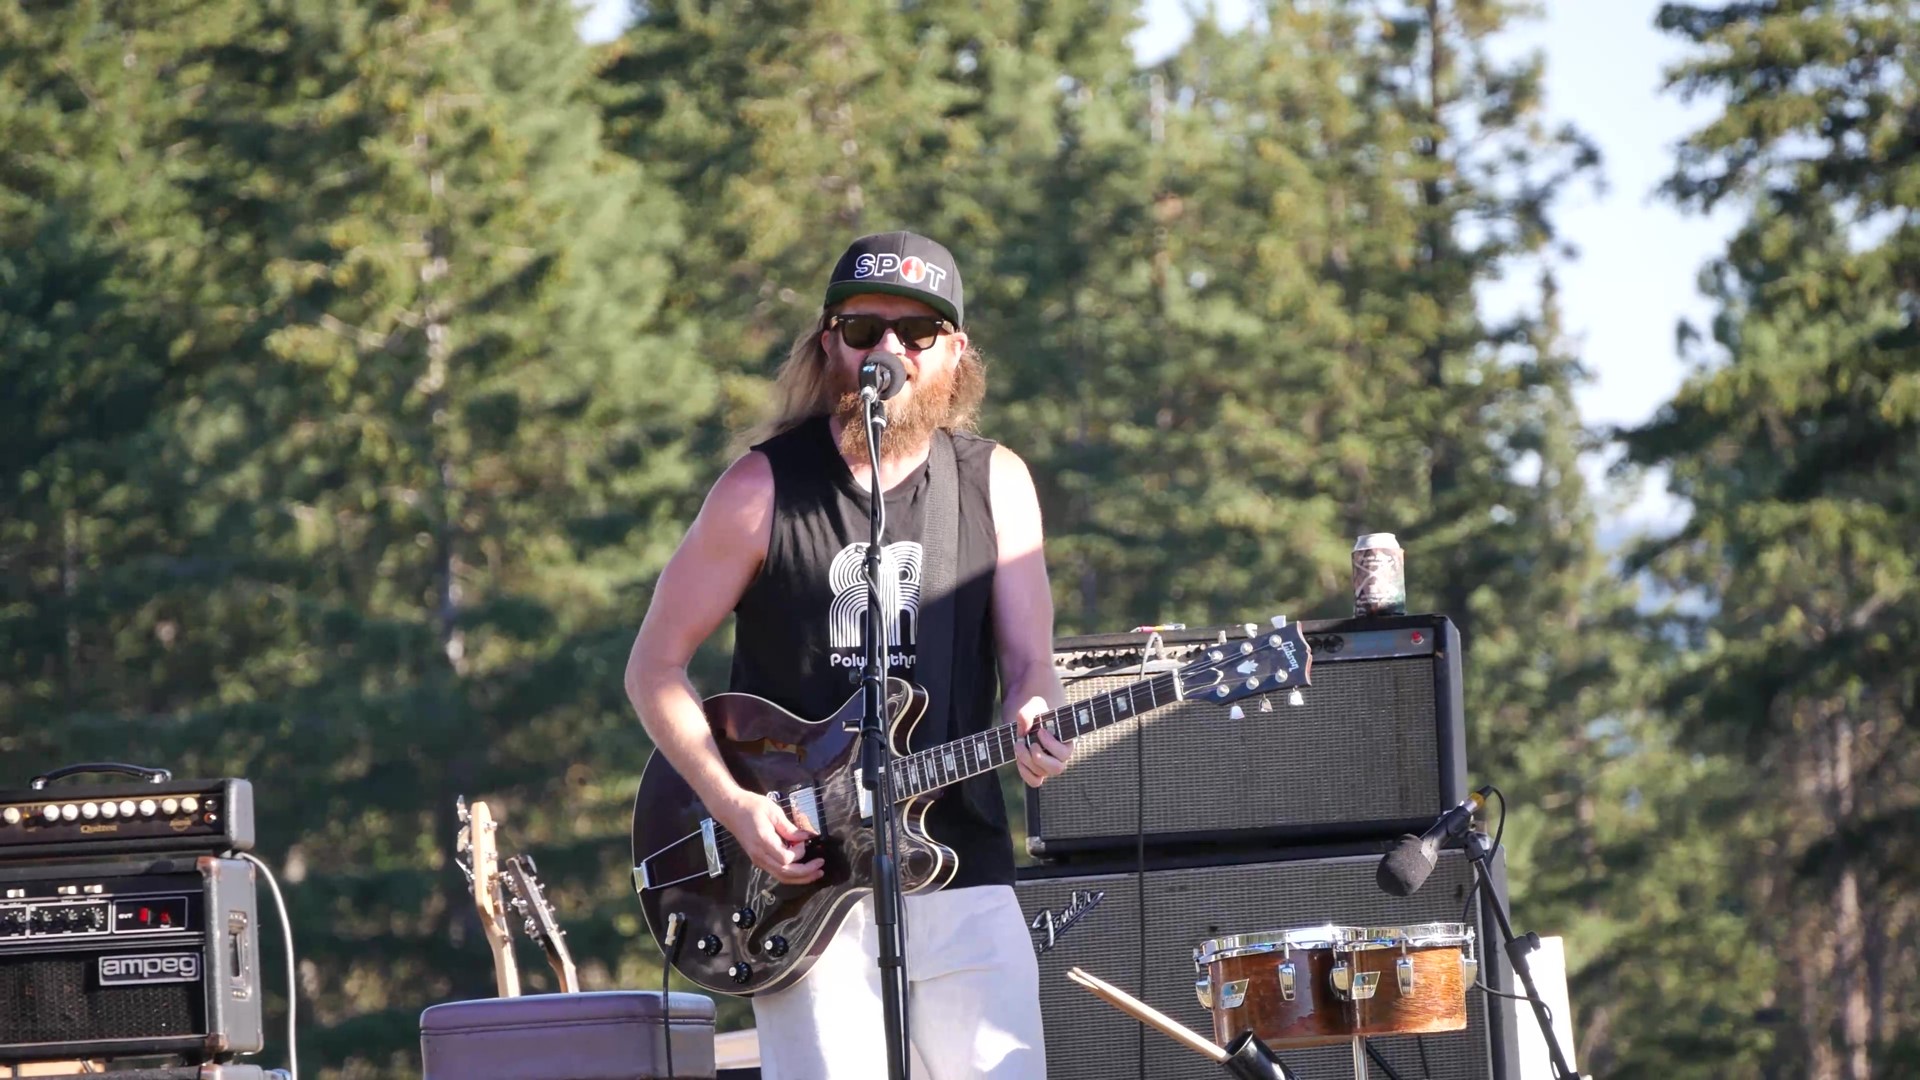 Suncadia's Summertime at the Farm Concert Series is a free event with good music and good times. Sponsored by Suncadia.